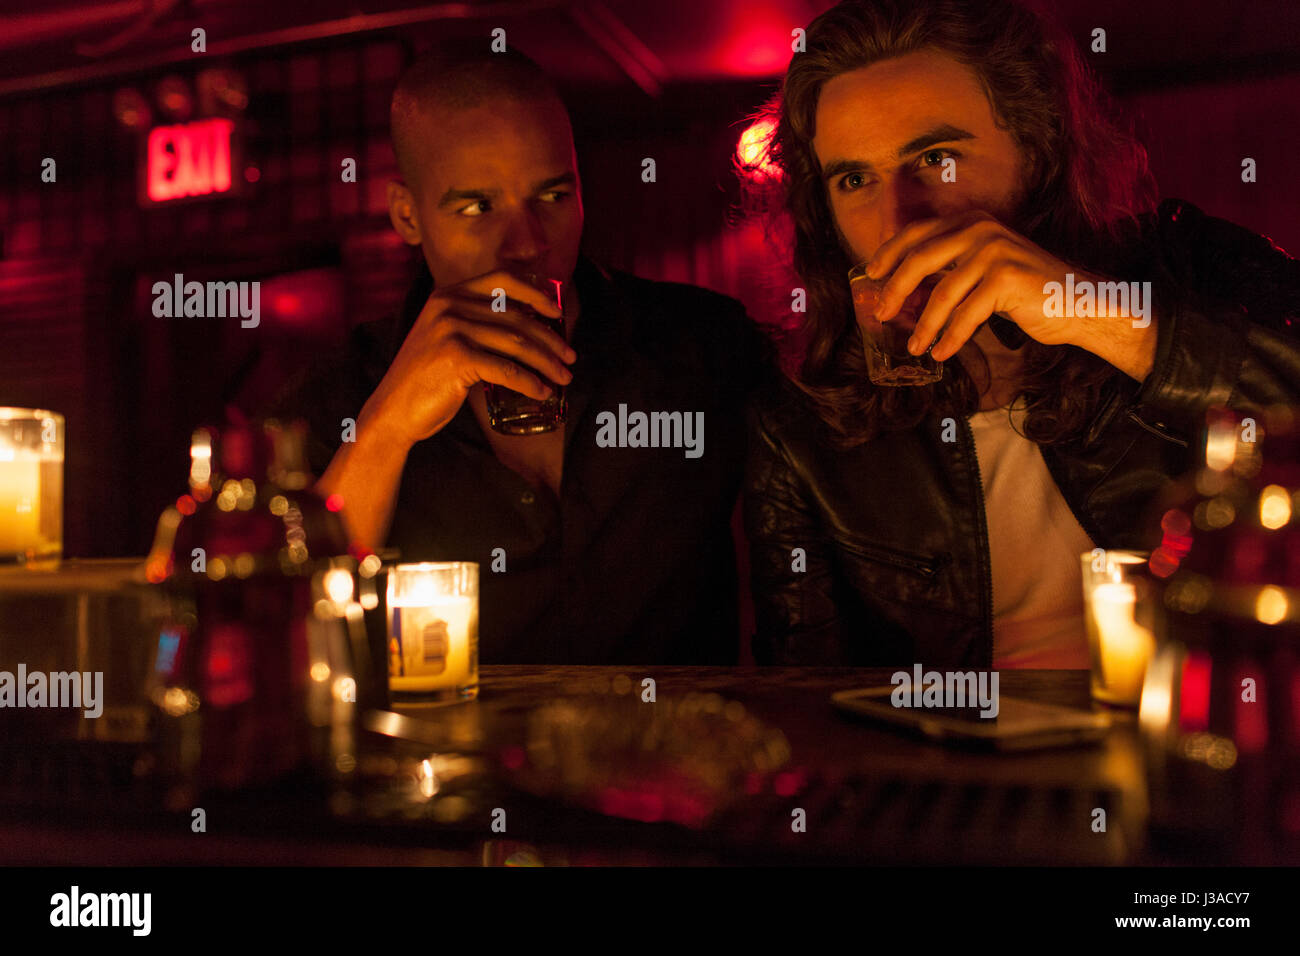 Young men hanging out at a nightclub Stock Photo